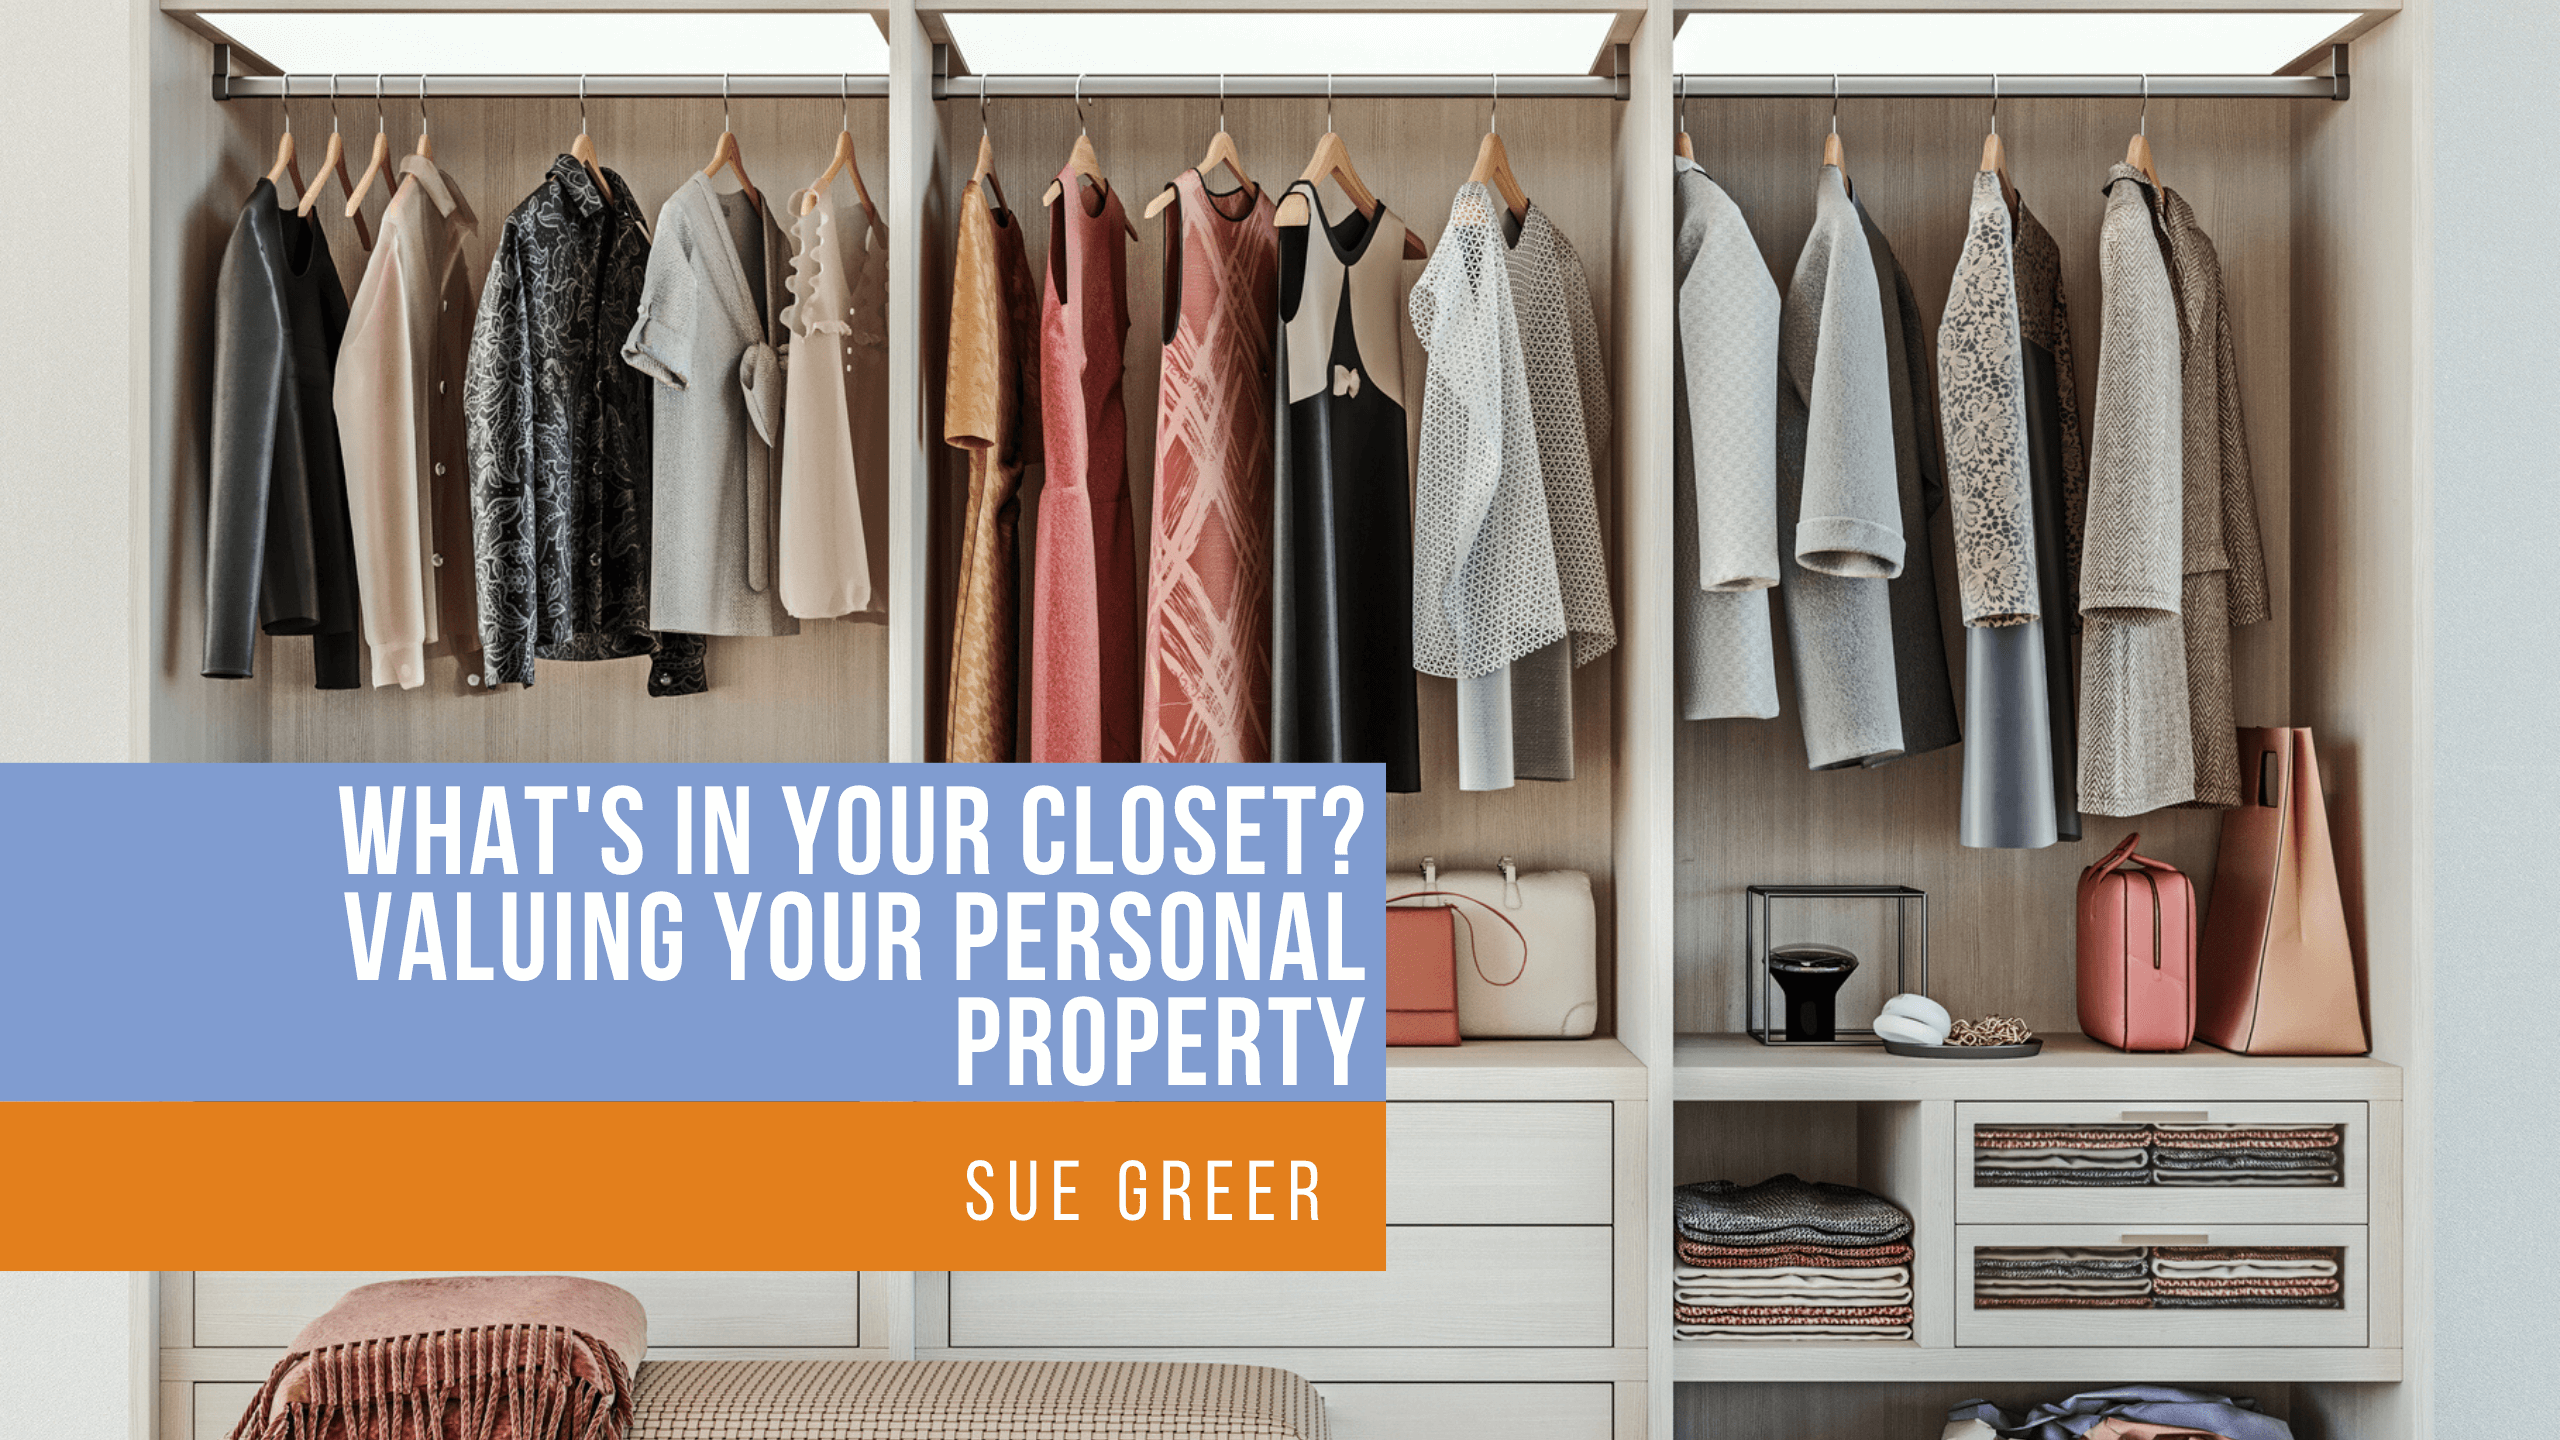 Whats in your closet? Valuing your personal property